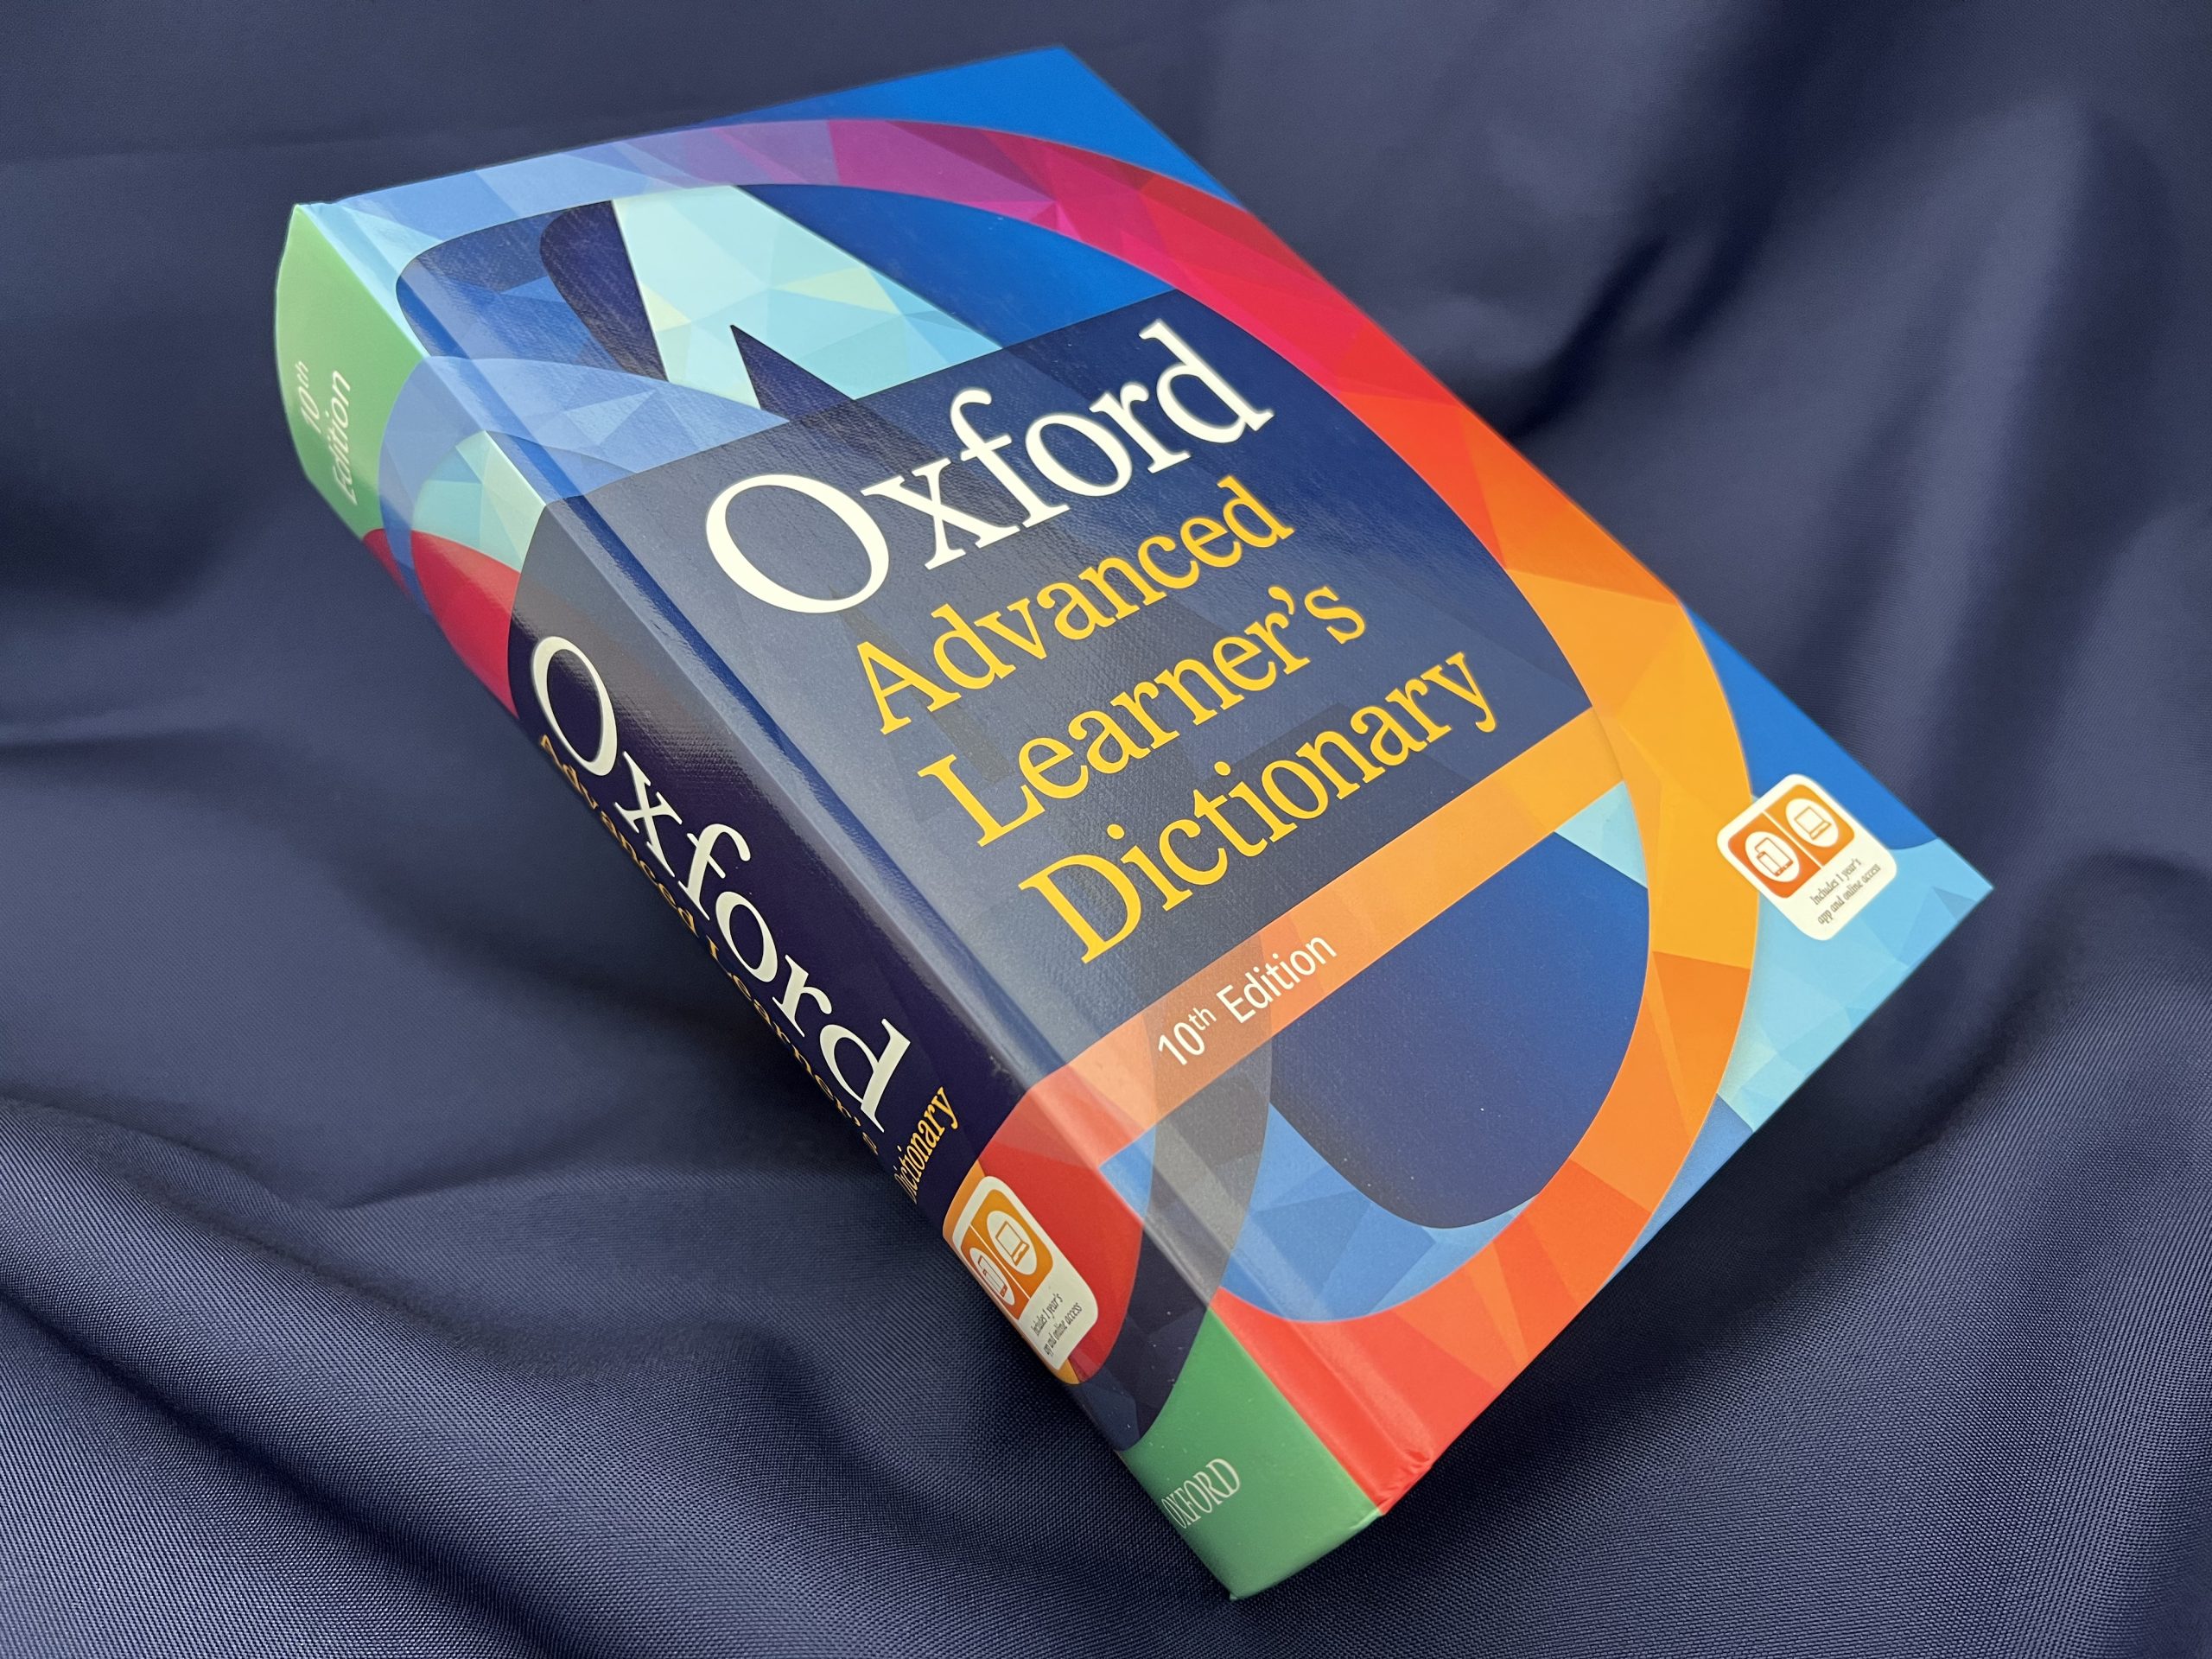 Oxford Advanced Learner's Dictionary - Now and then - Teaching English with  Oxford